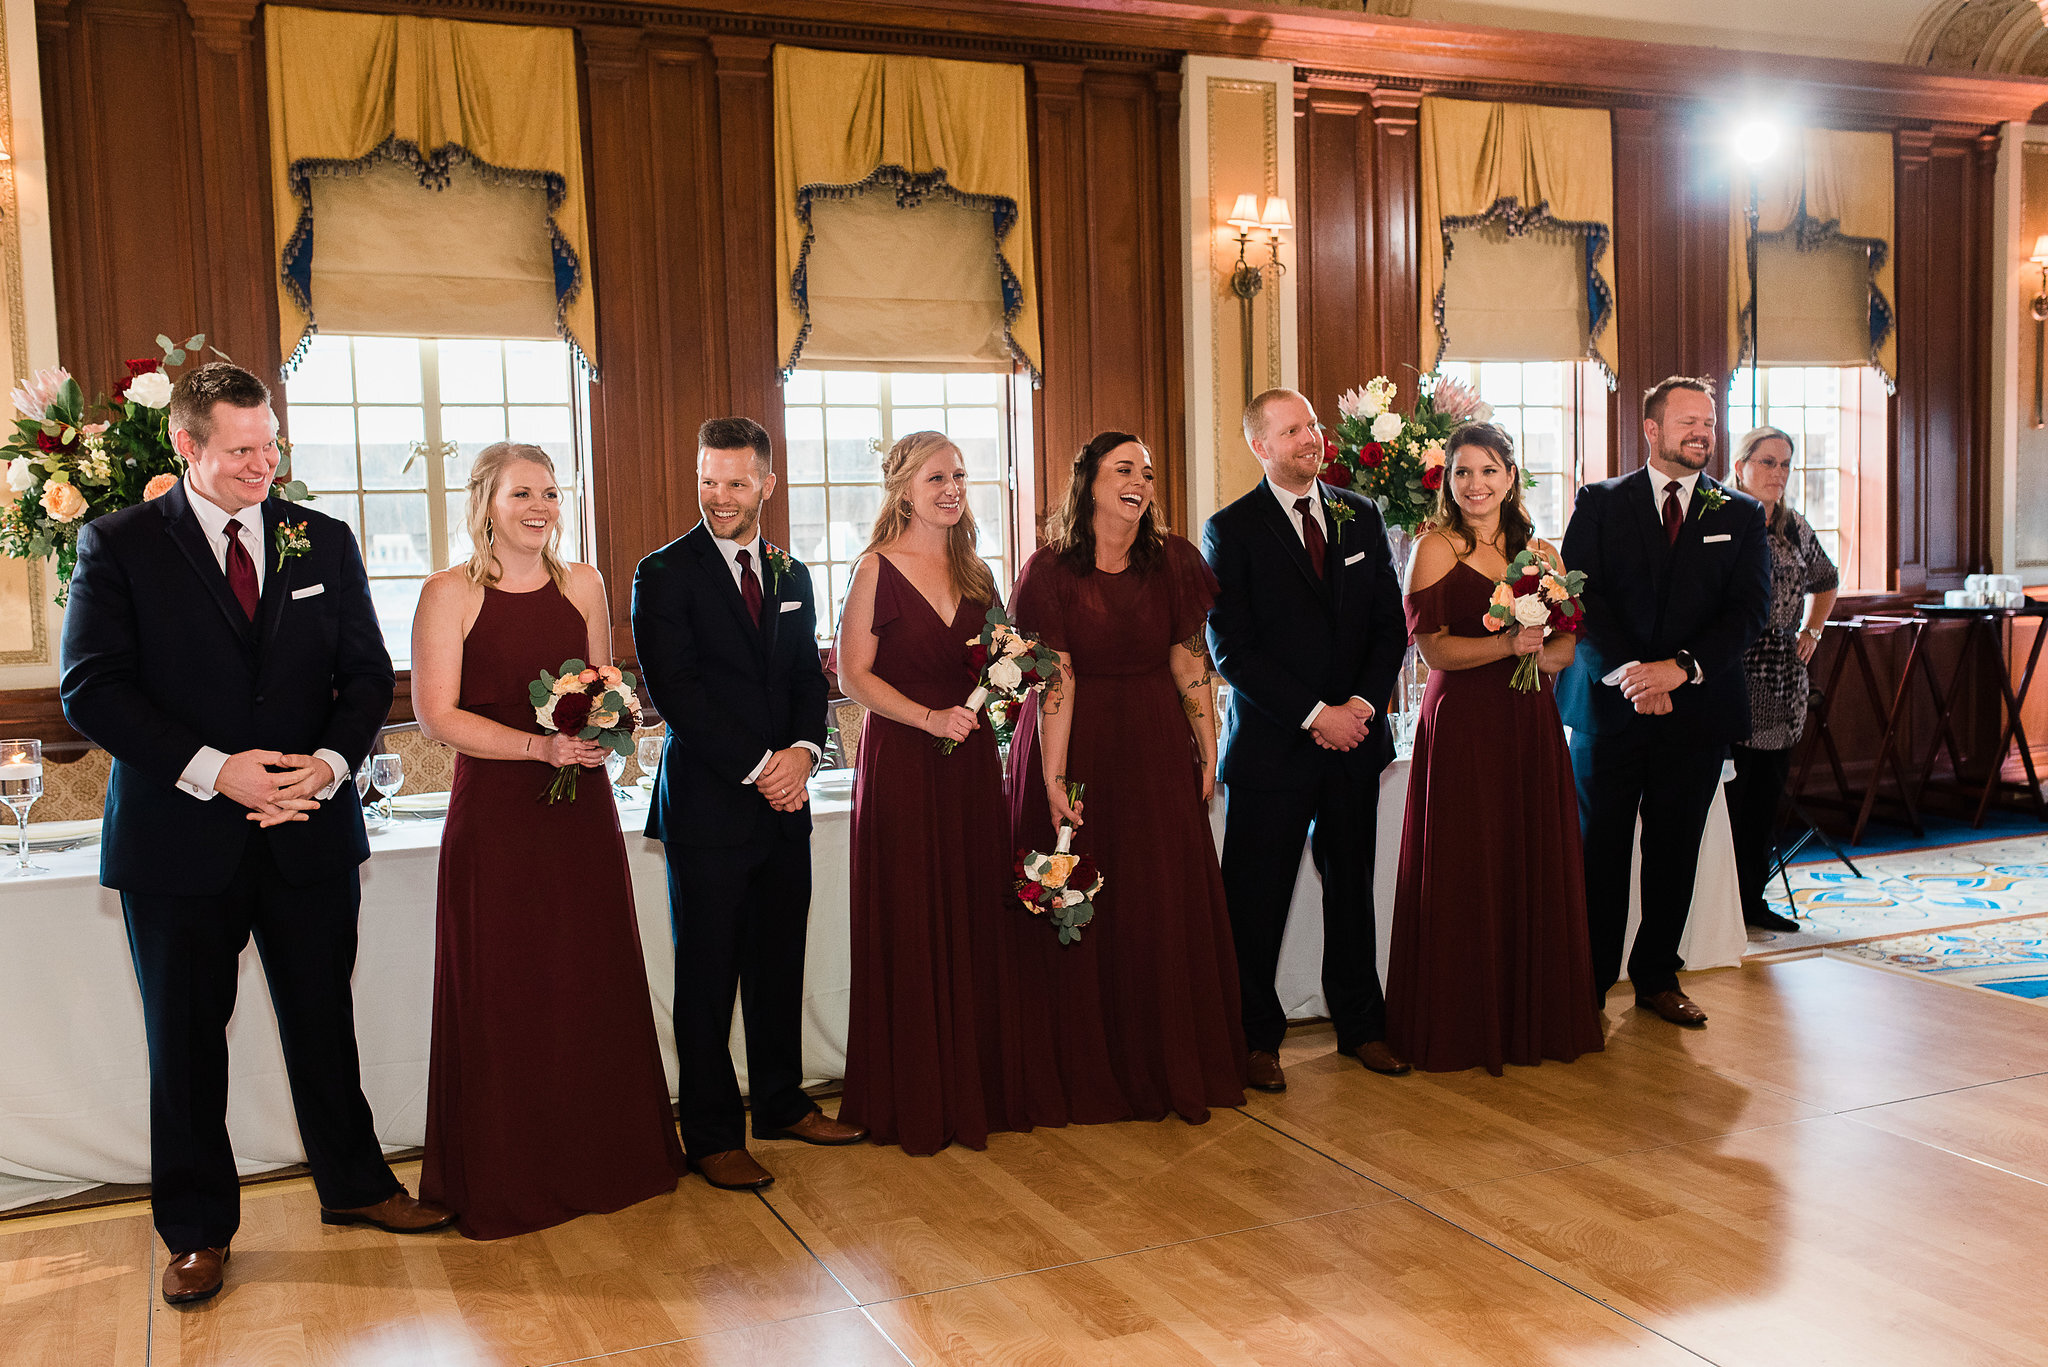 Guests were first greeted with signature drinks and an incredible-looking room with incredible floral and many personal details. Then the grand entrance of the wedding party set up the perfect background for what came next.